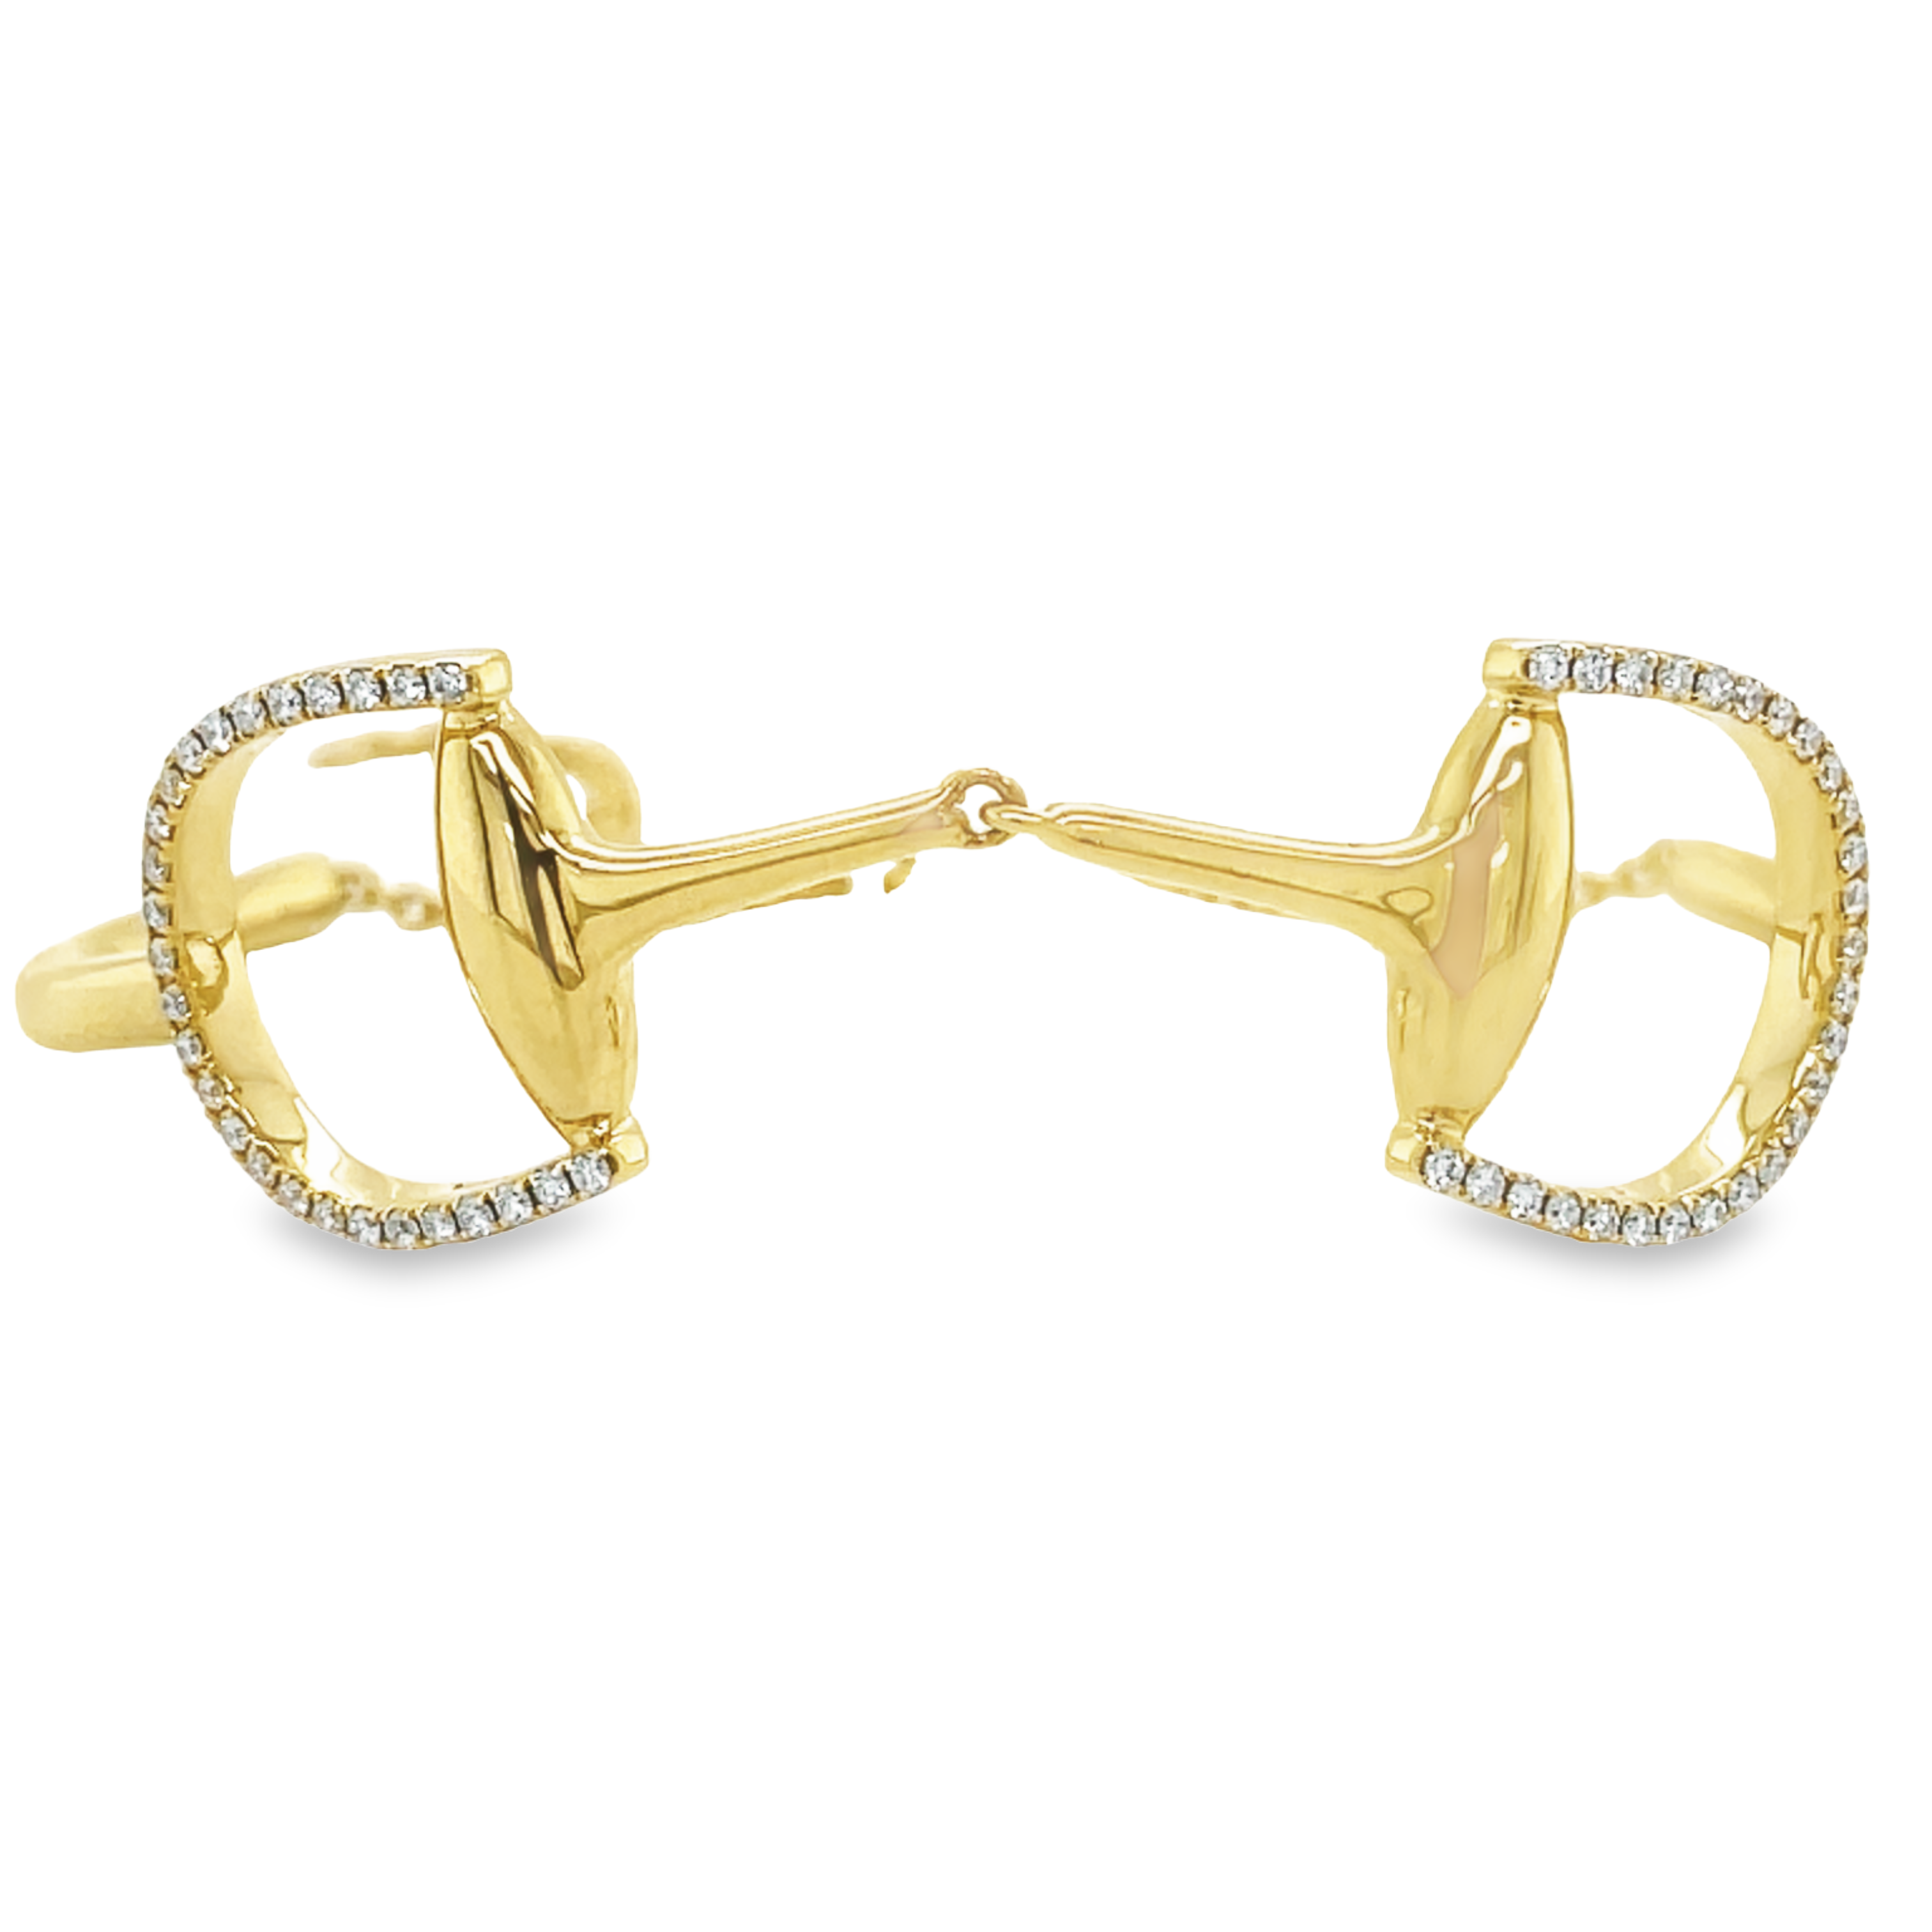 This quality bracelet is crafted from 14k Italian yellow gold and features a secure lobster clasp and elegant round diamonds totaling 0.29 carats. At two inches long, it's a stunning accompaniment to any outfit.